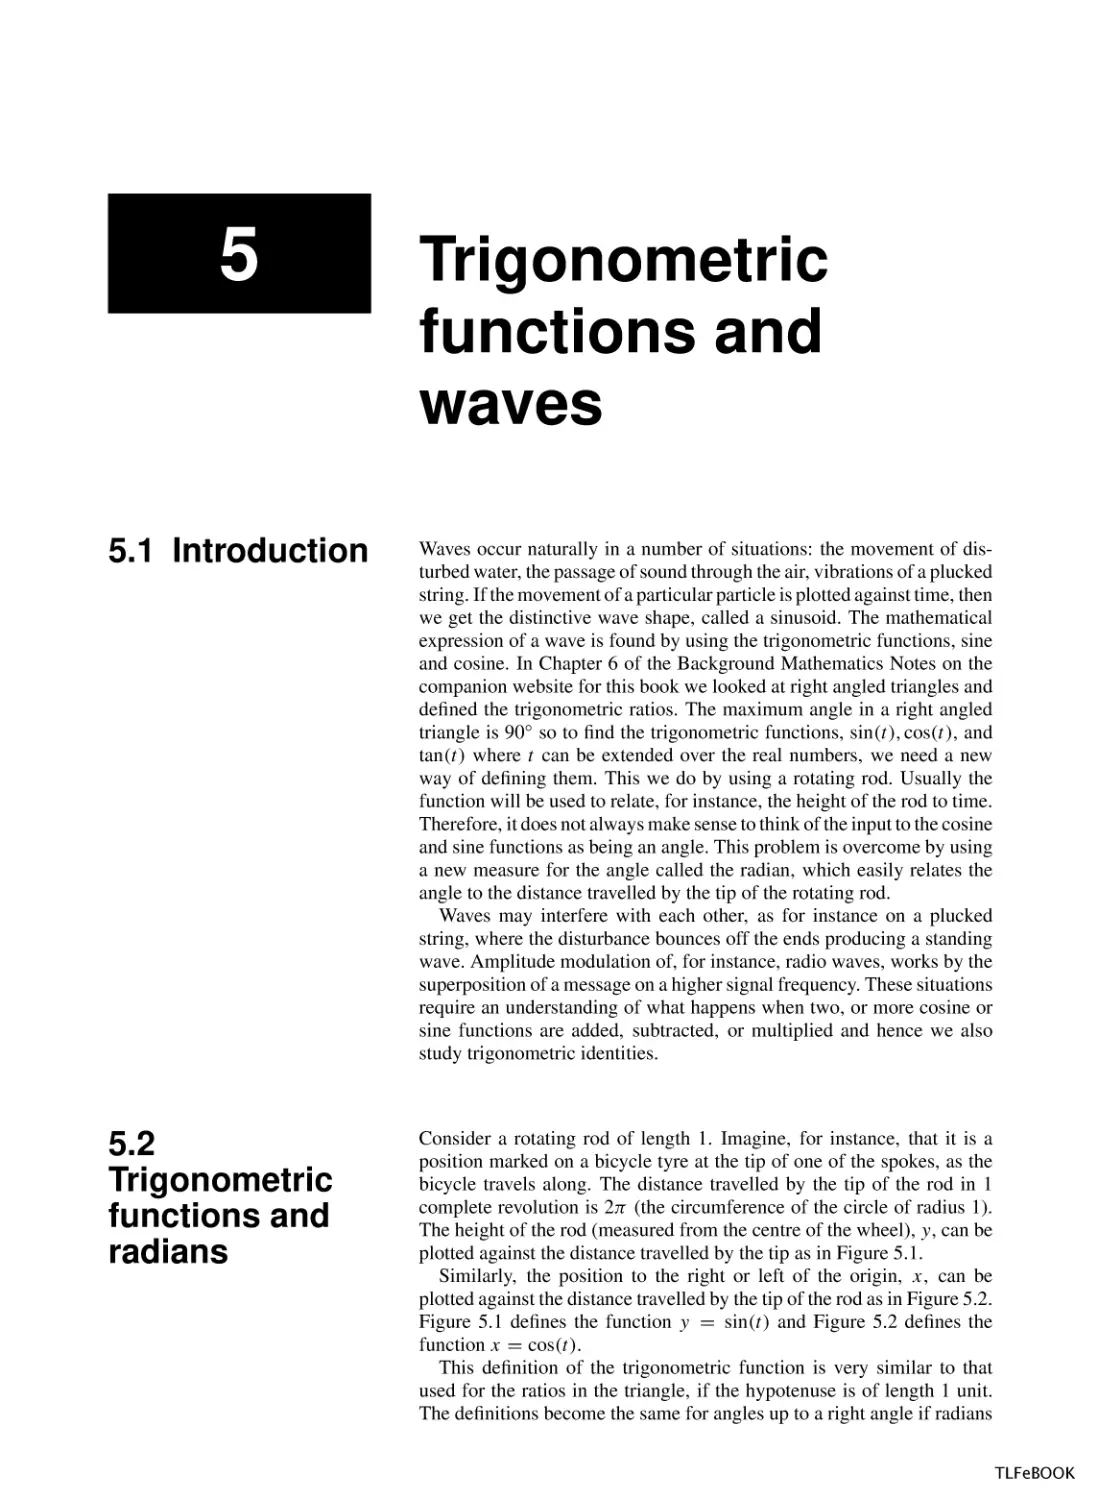 Trigonometric Functions and Waves